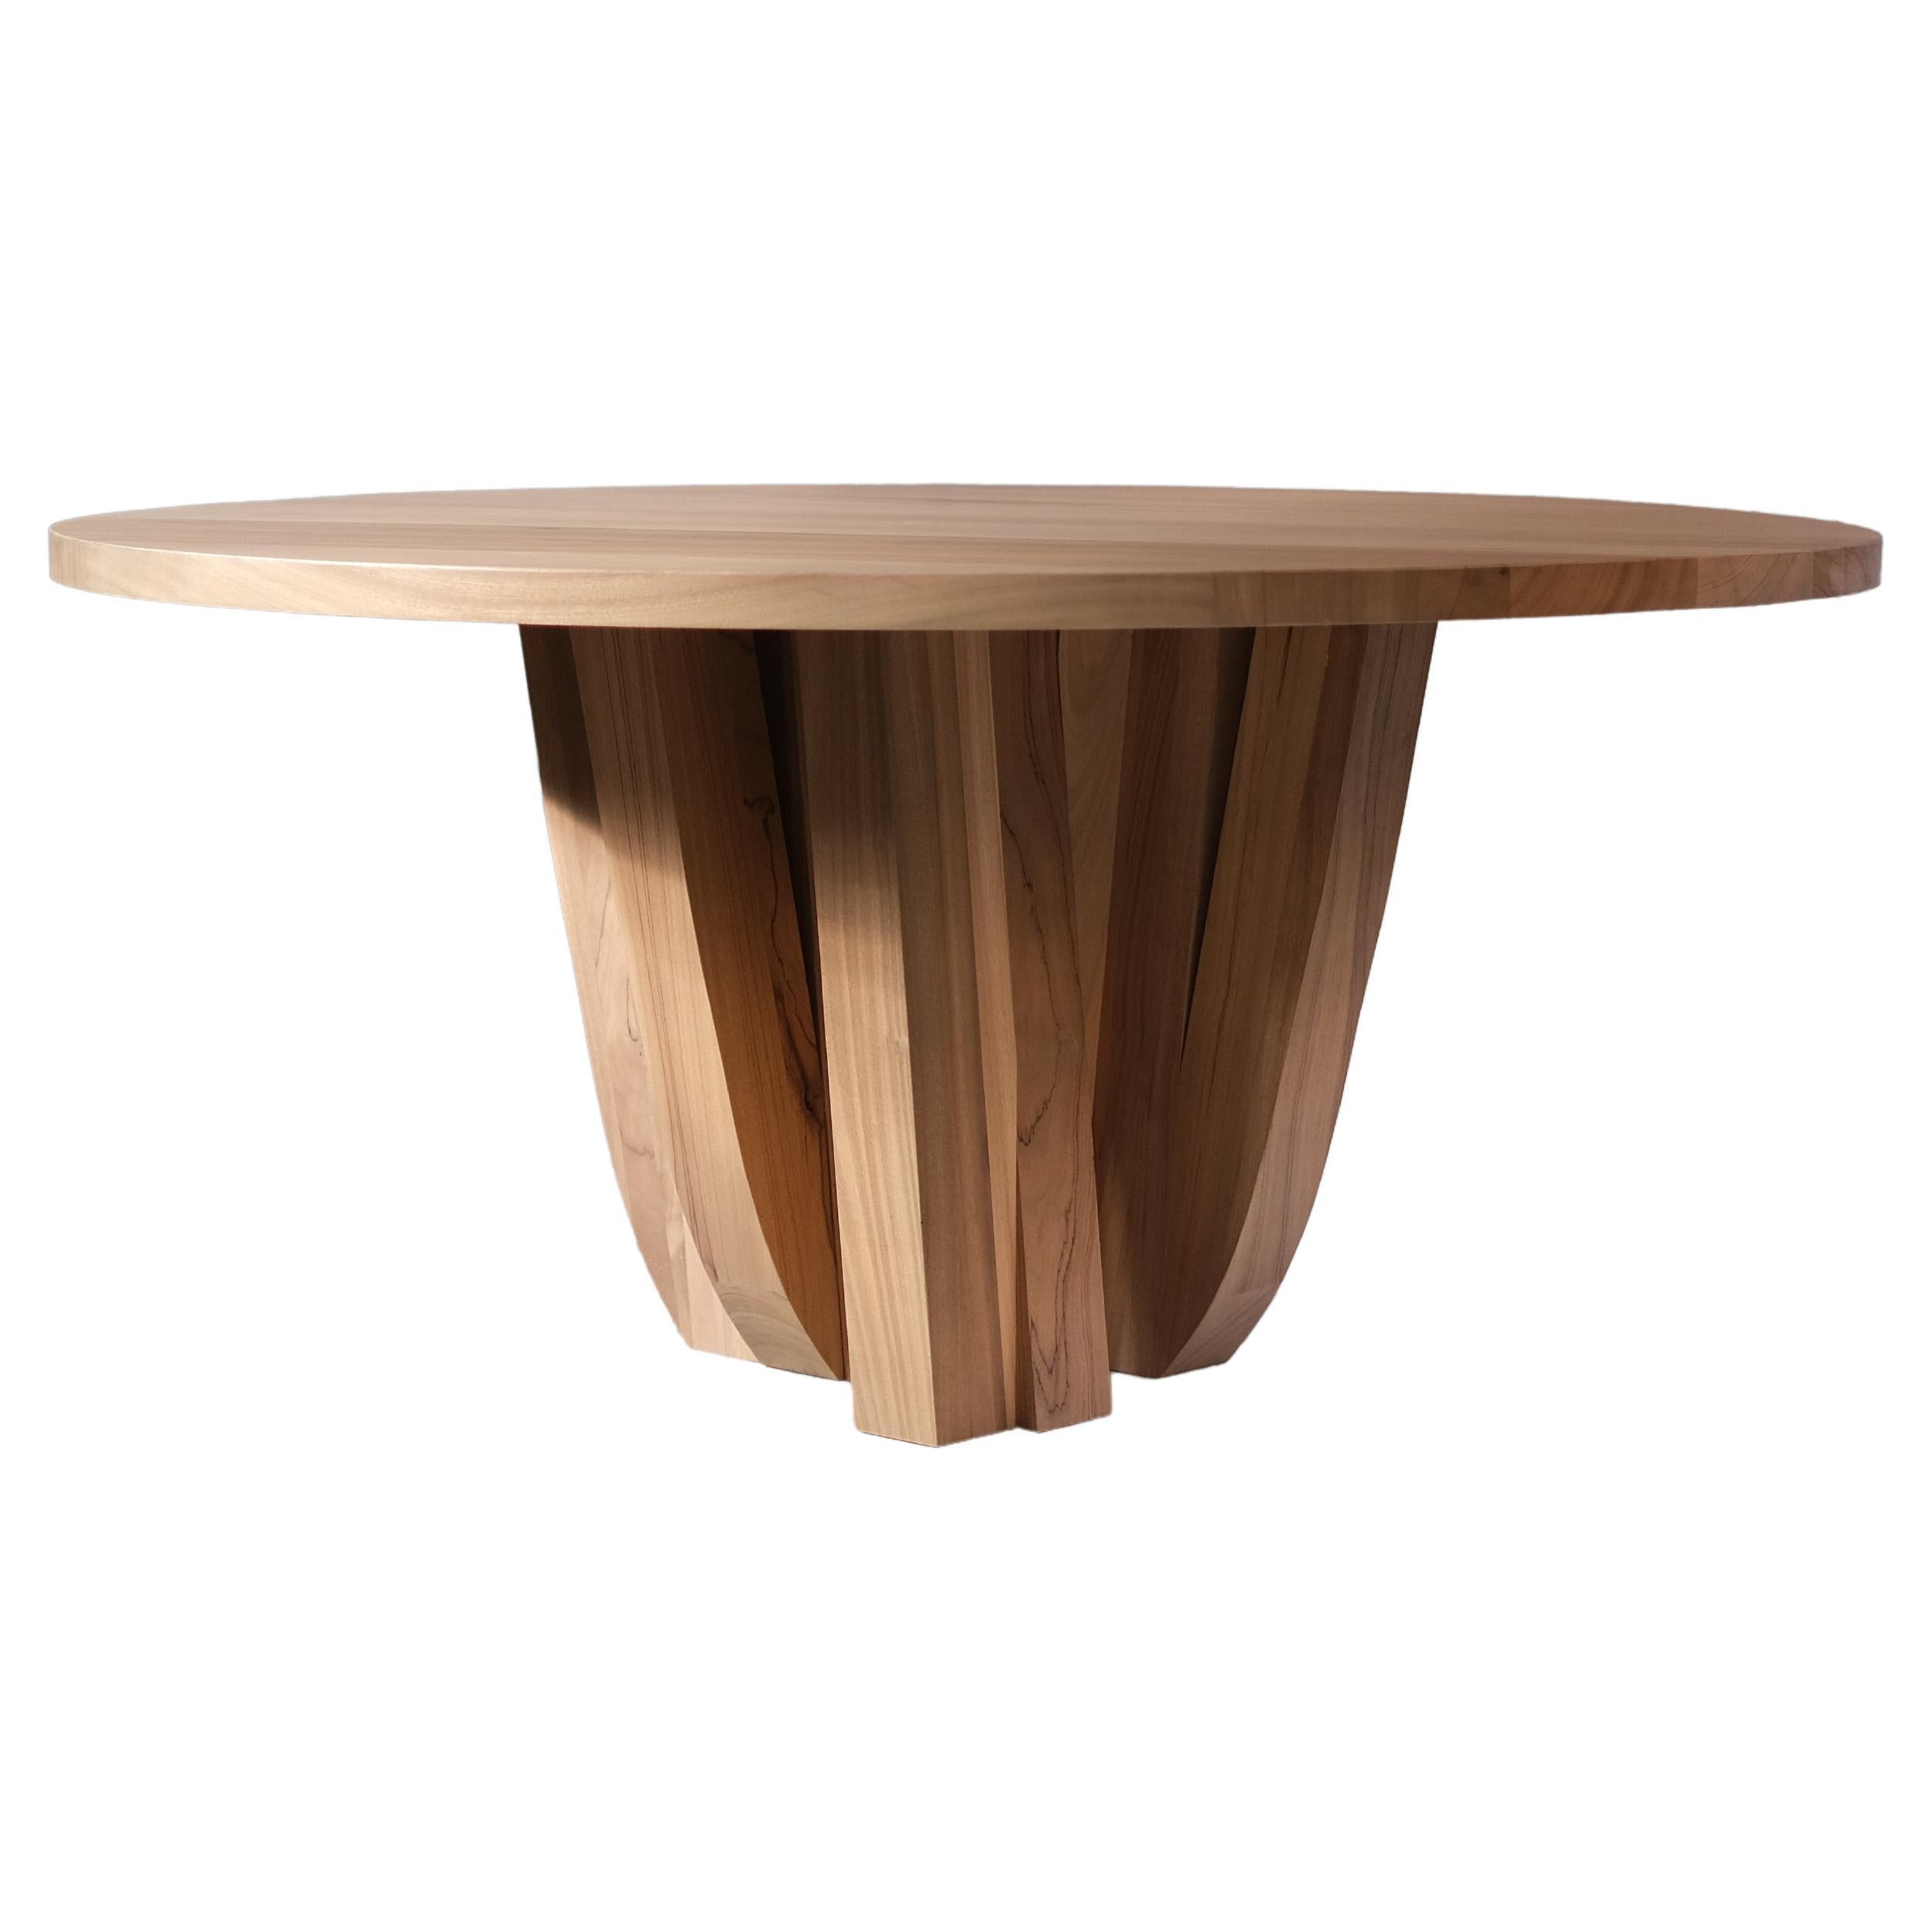 Zoumey Round Table in African Walnut by Arno Declercq